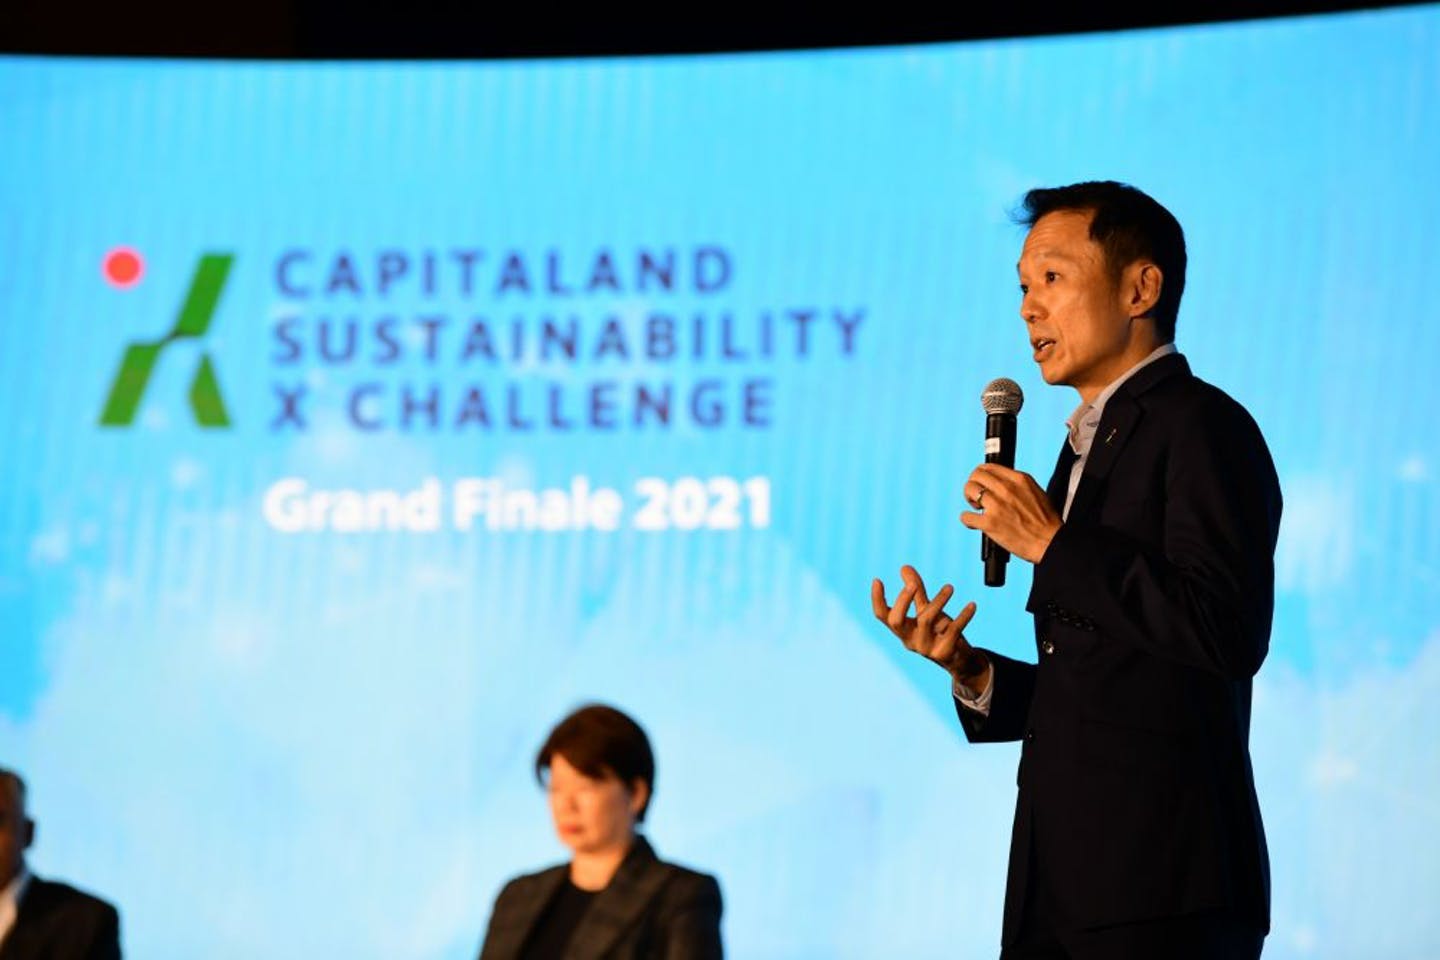 Climatech Corp and Inovues win the inaugural CapitaLand Sustainability X Challenge